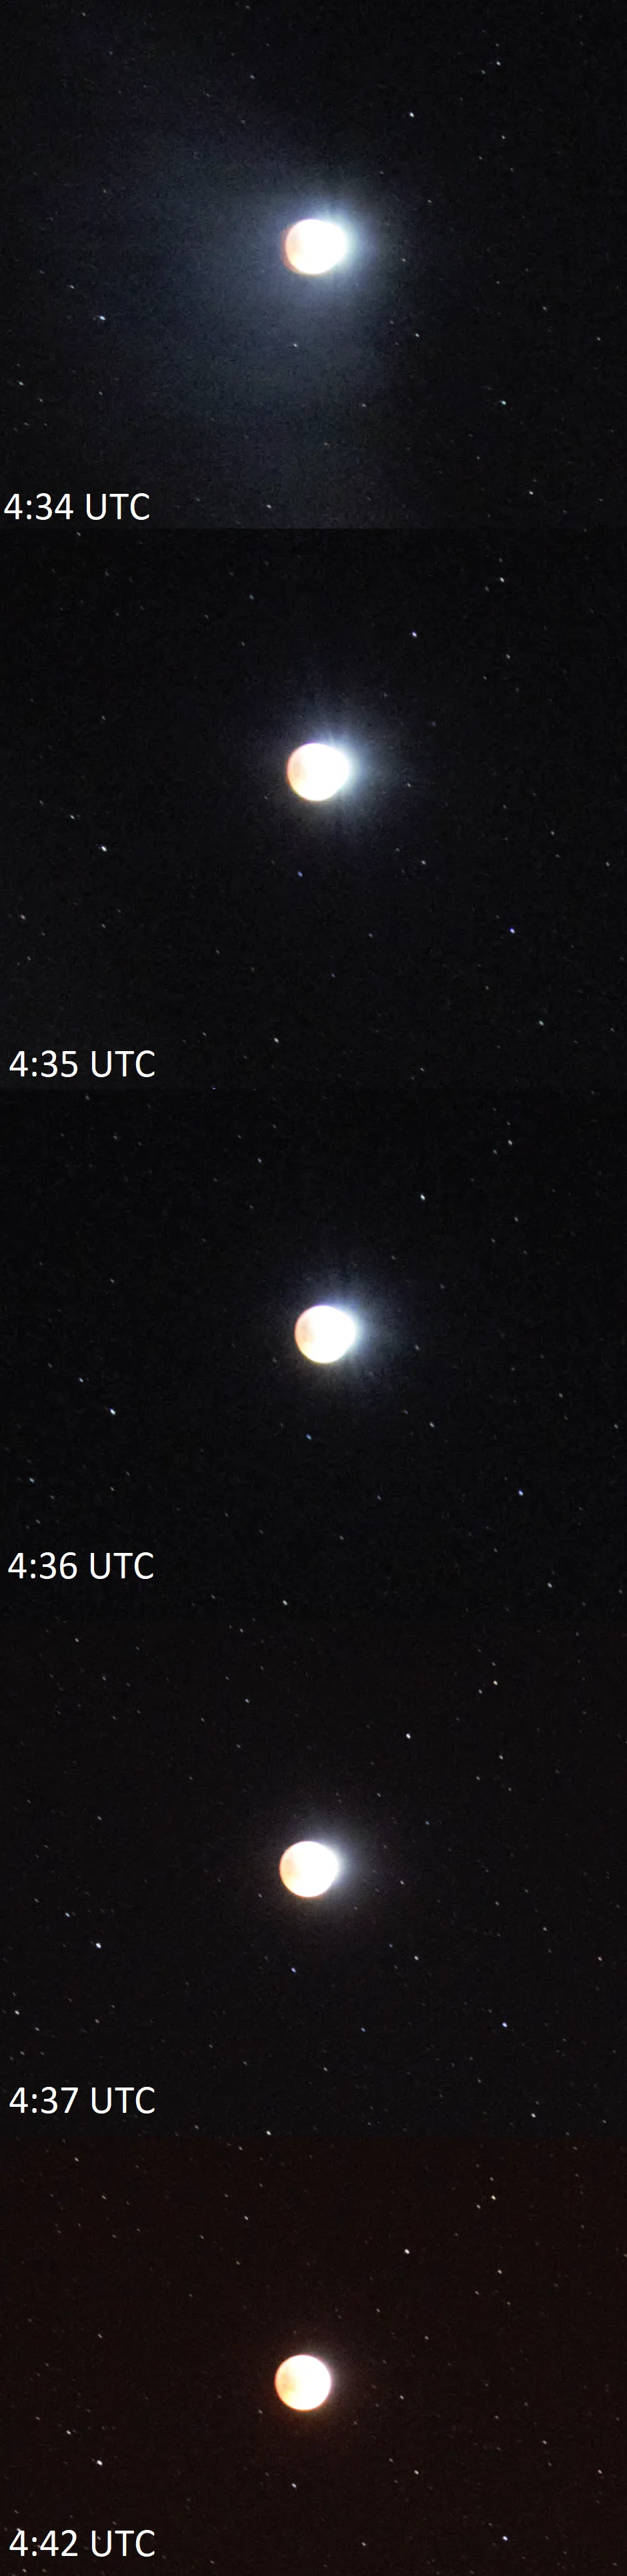 Total lunar eclipse 2019 last beam of moonlight before total phase